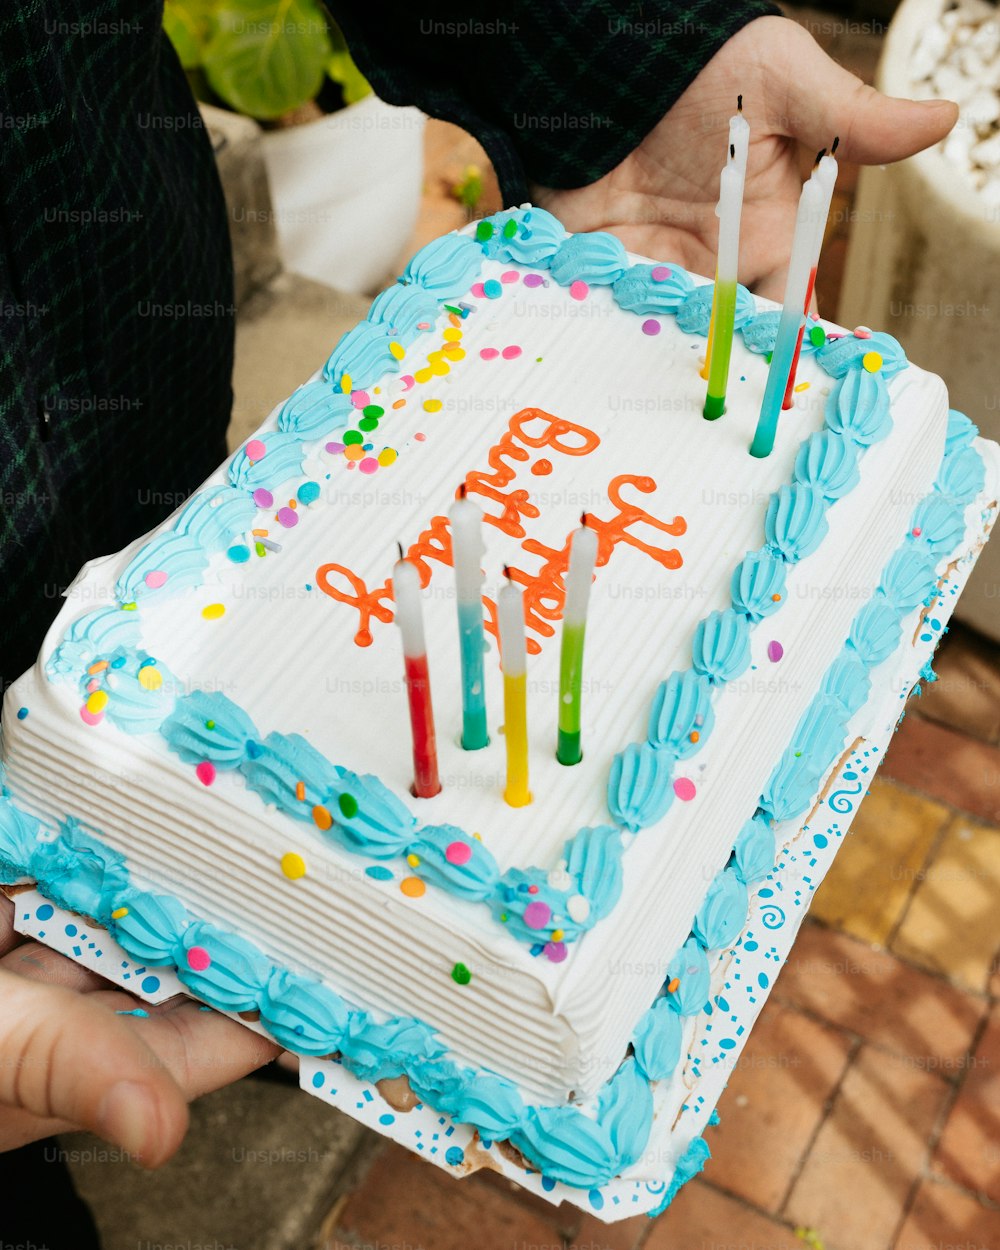 a person holding a birthday cake with candles